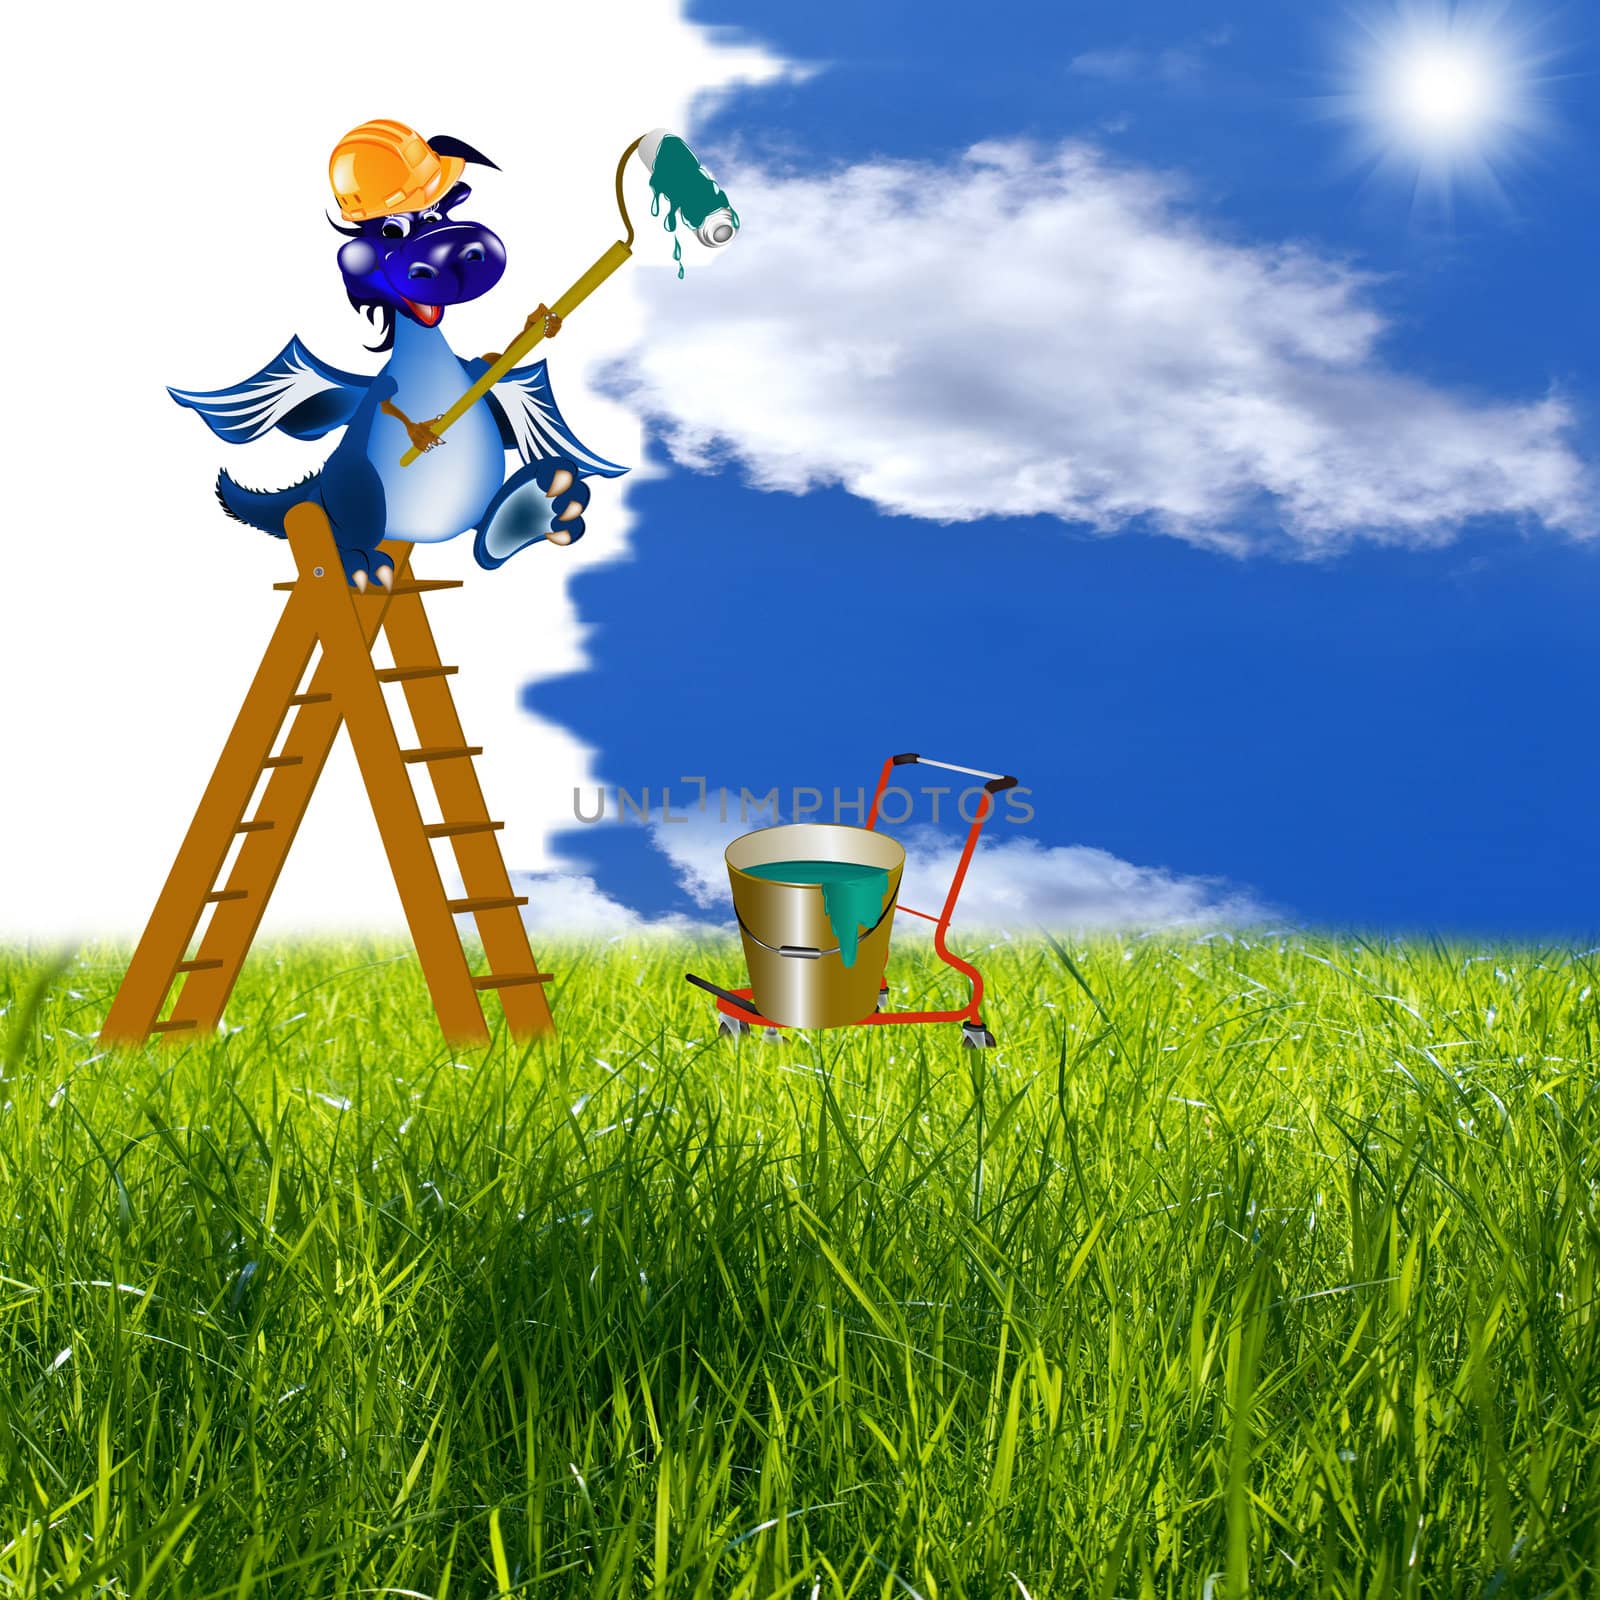 The dark blue dragon-house painter on a step-ladder will paint your life in colours of beauty and happiness